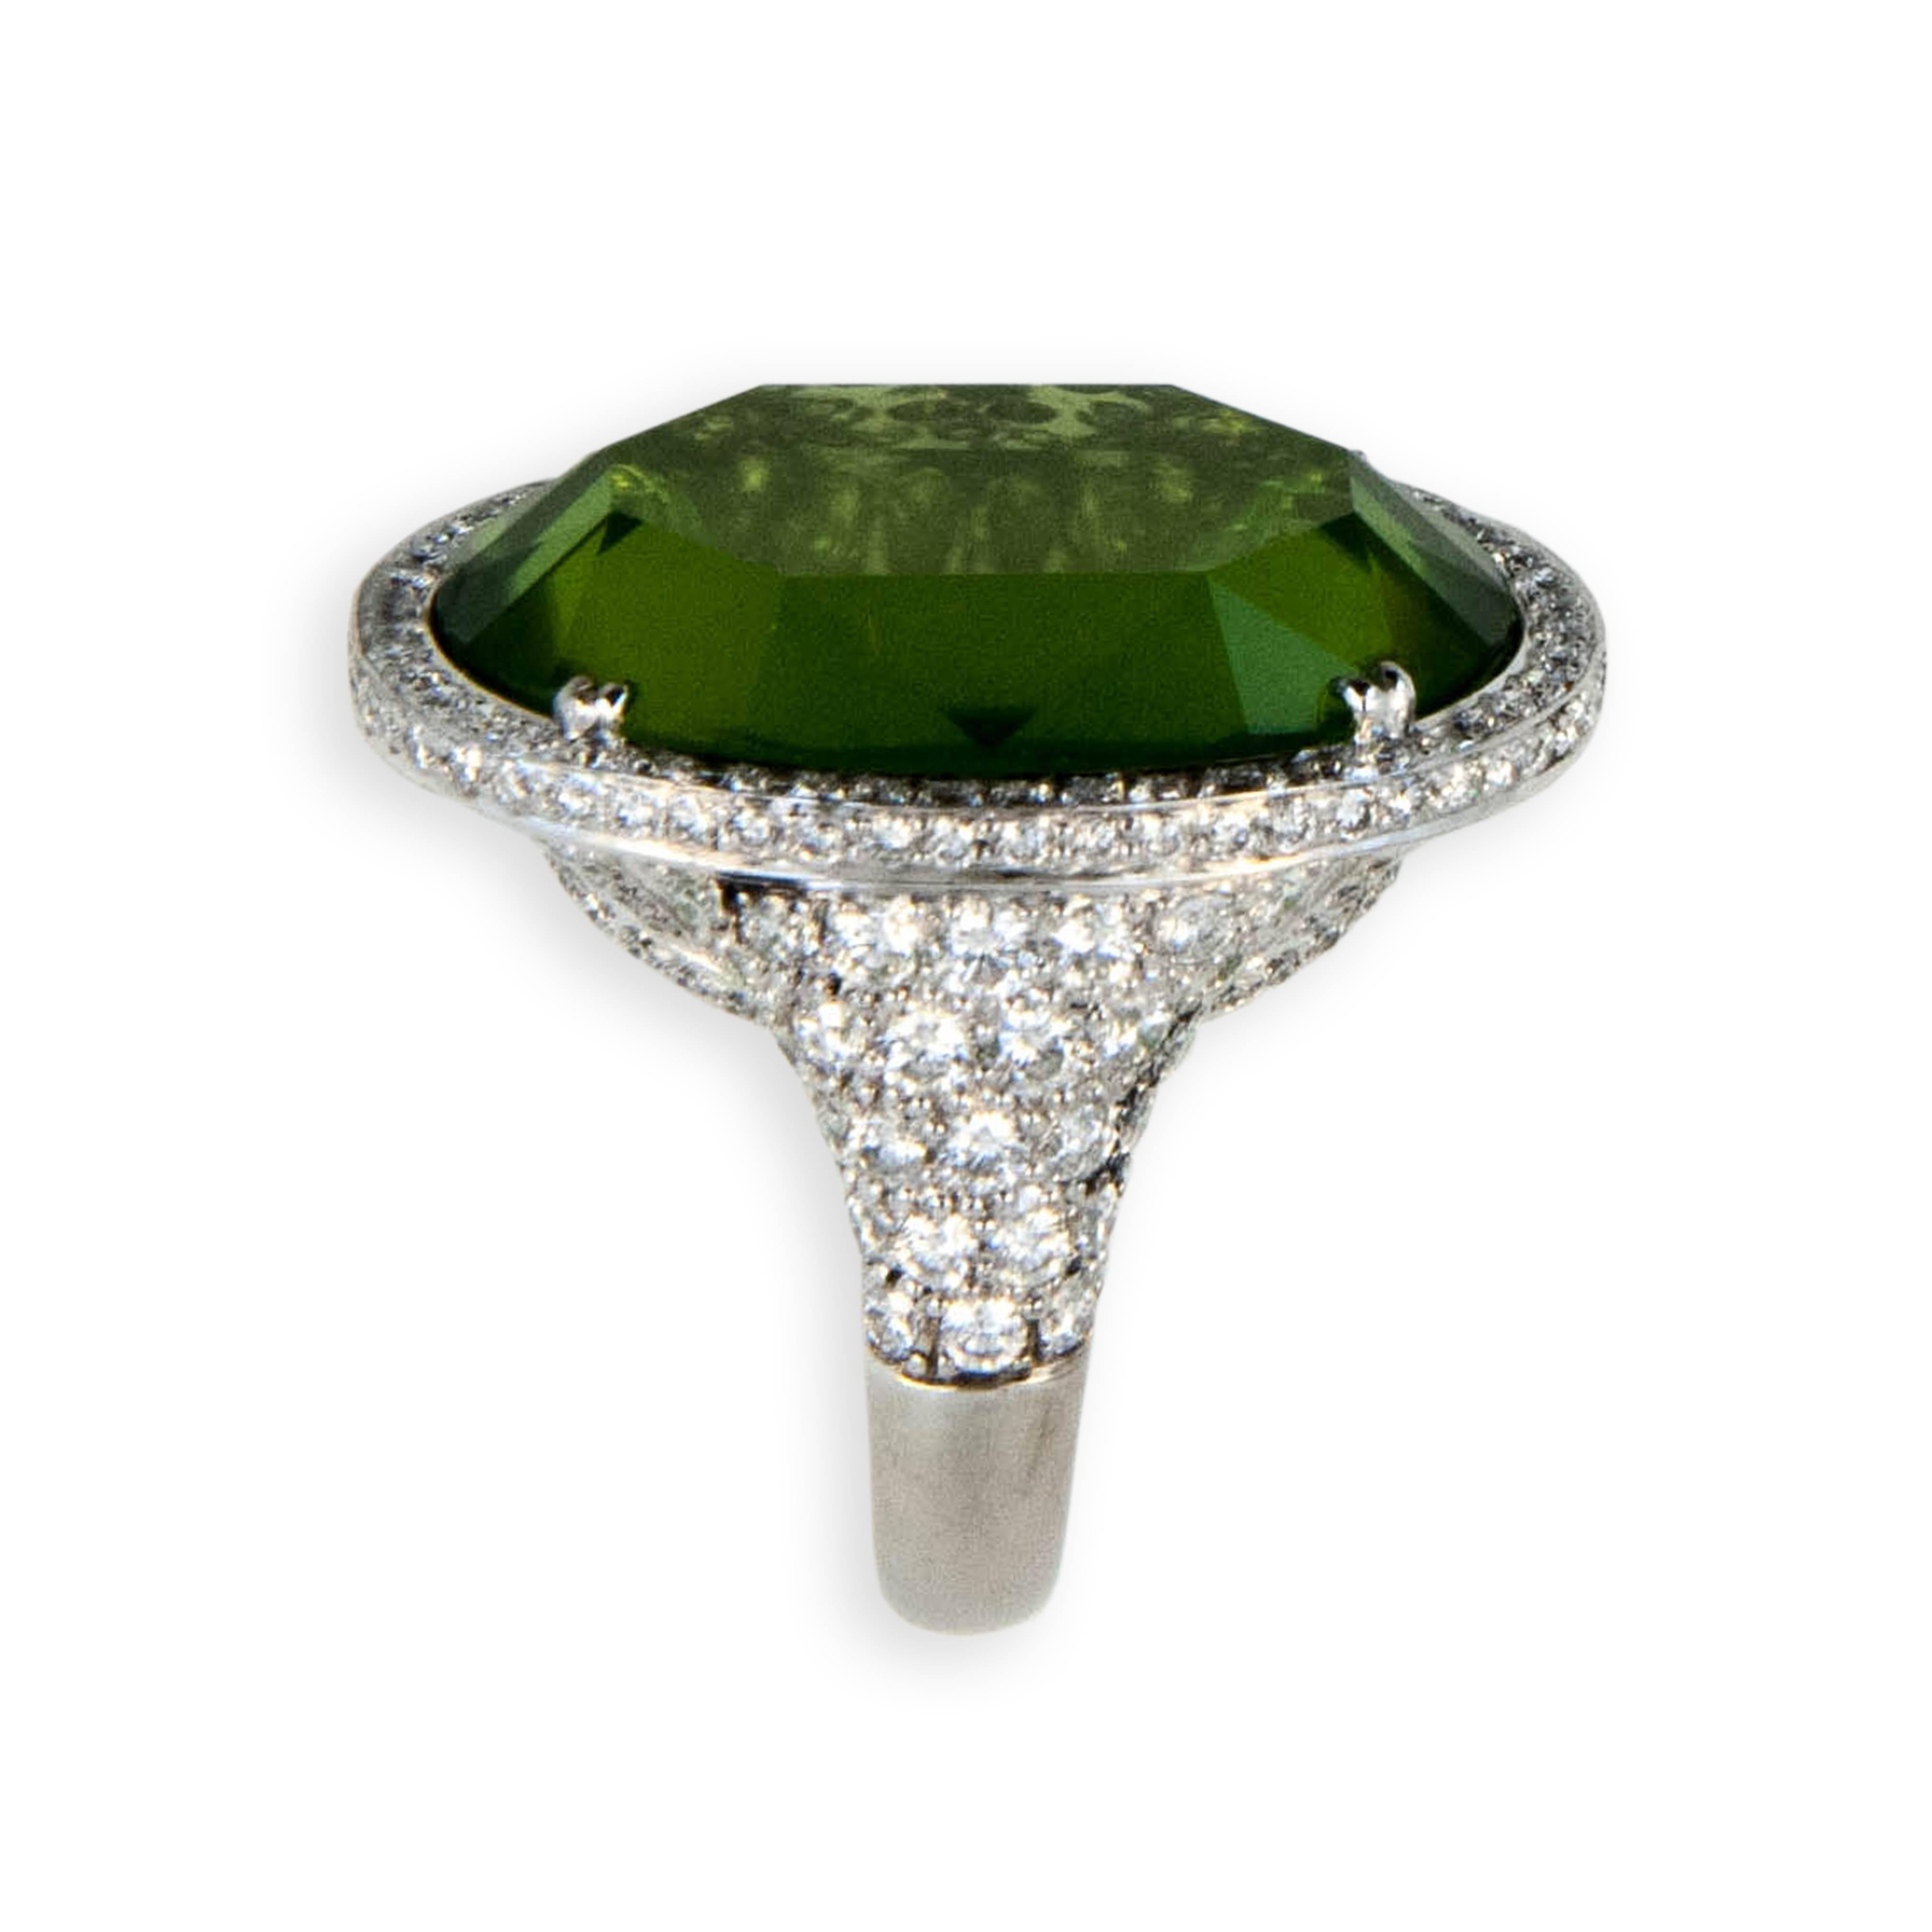 18 karat white gold ring set with one oval faceted Peridot 27.44 carats, no culet, table like facet on both sides. Bezel, under bezel and partial shank are pave' 
and microset with 222 diamonds 2.87 carats total weight. 